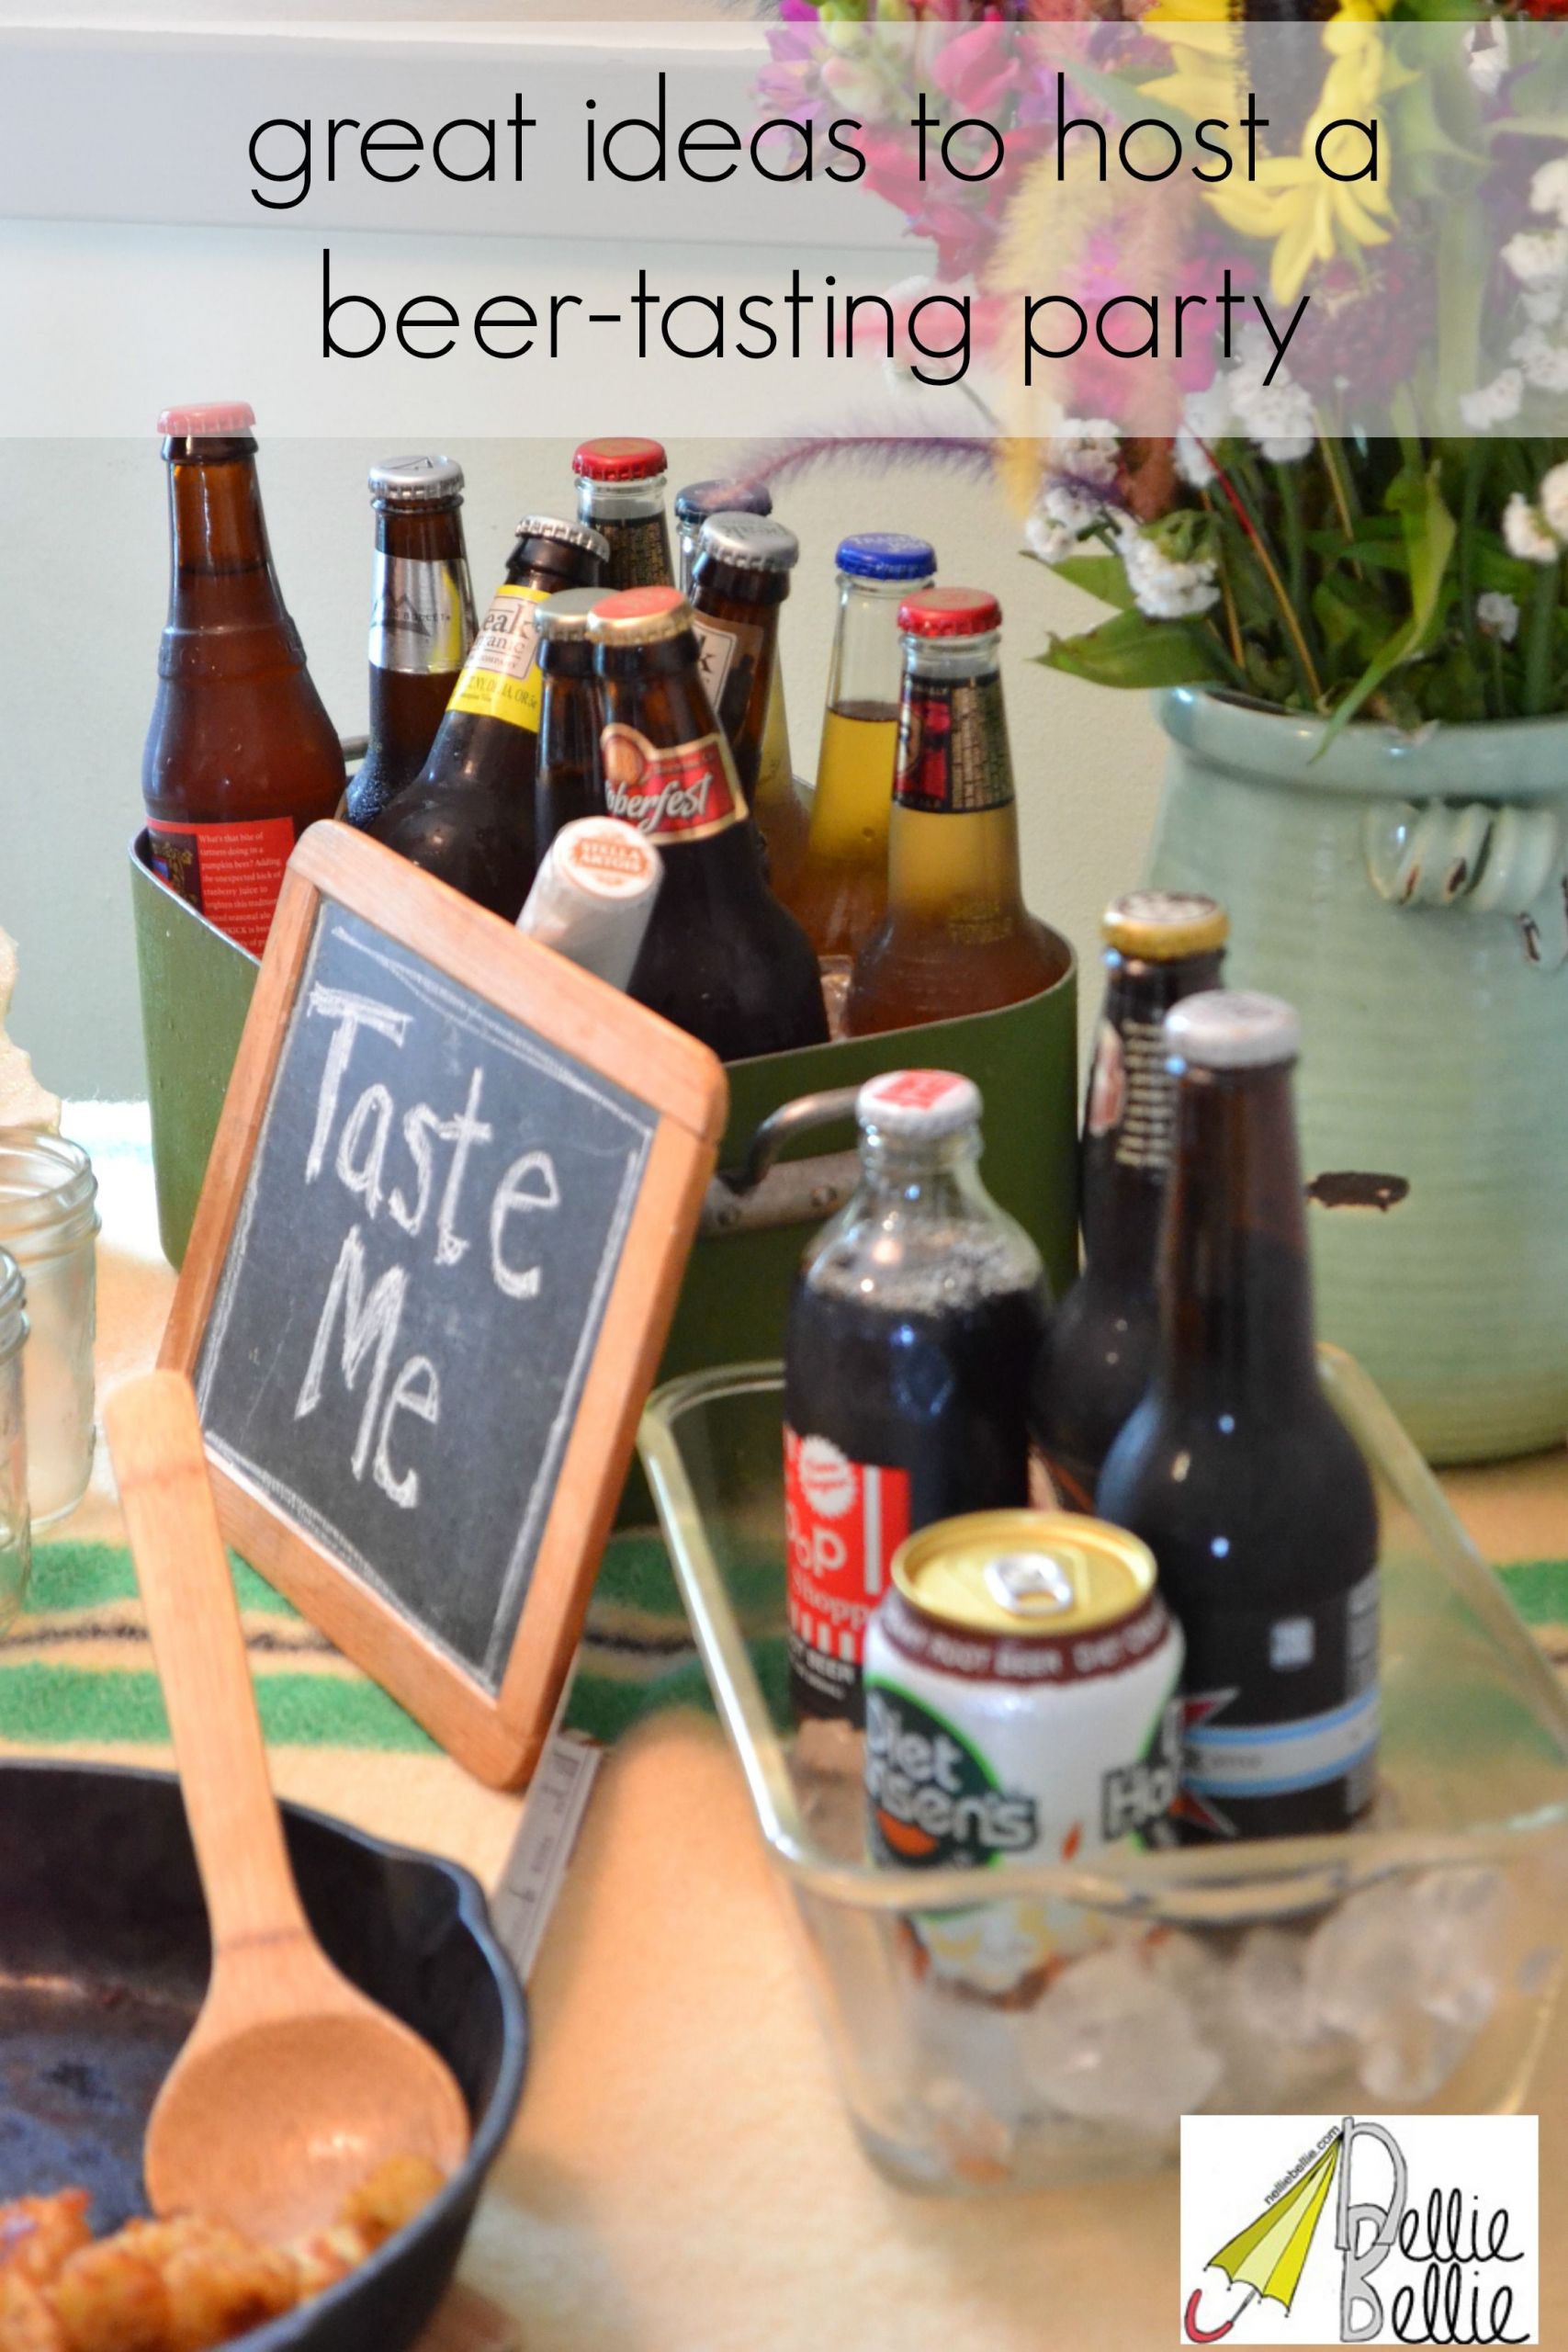 Cheap Summer Party Ideas
 Great ideas for a beer tasting party A fun inexpensive